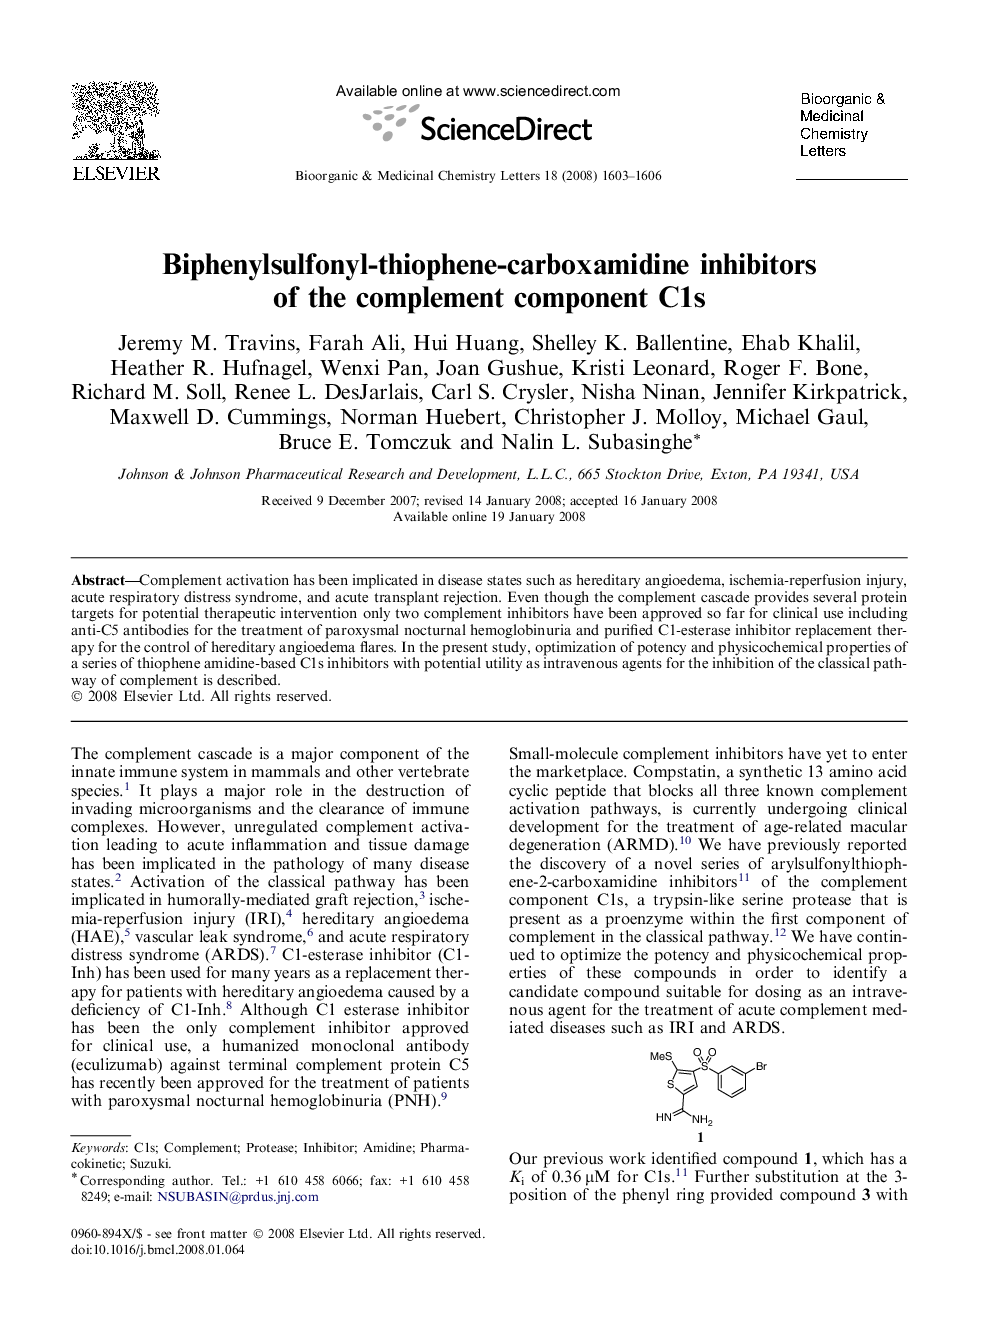 Biphenylsulfonyl-thiophene-carboxamidine inhibitors of the complement component C1s